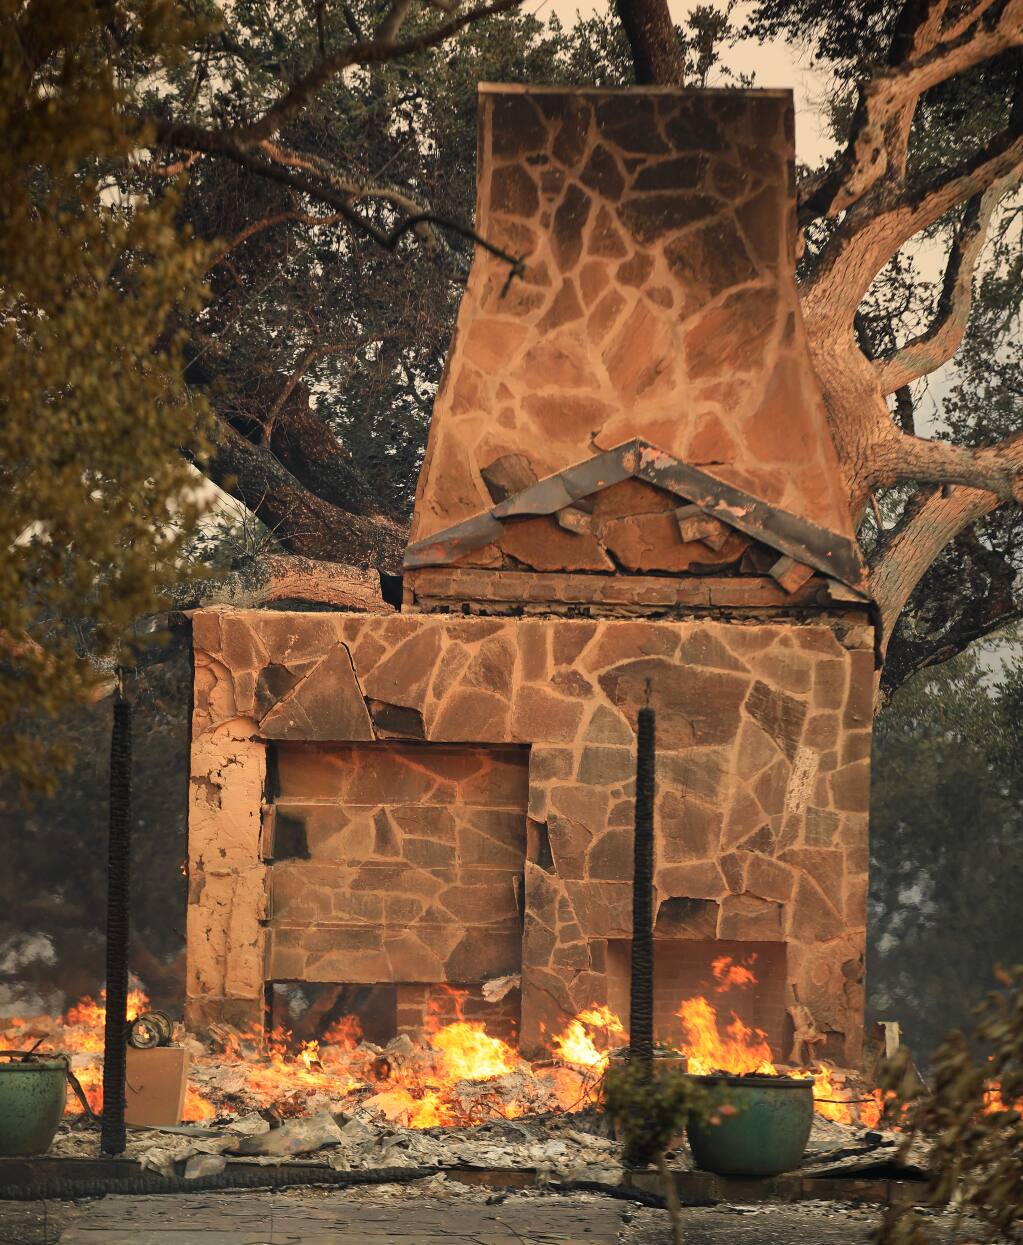 Several buildings were destroyed in the Jackson Family compound by the Kincade fire, Thursday, Oct. 24, 2019 near Geyserville. (Kent Porter / The Press Democrat)